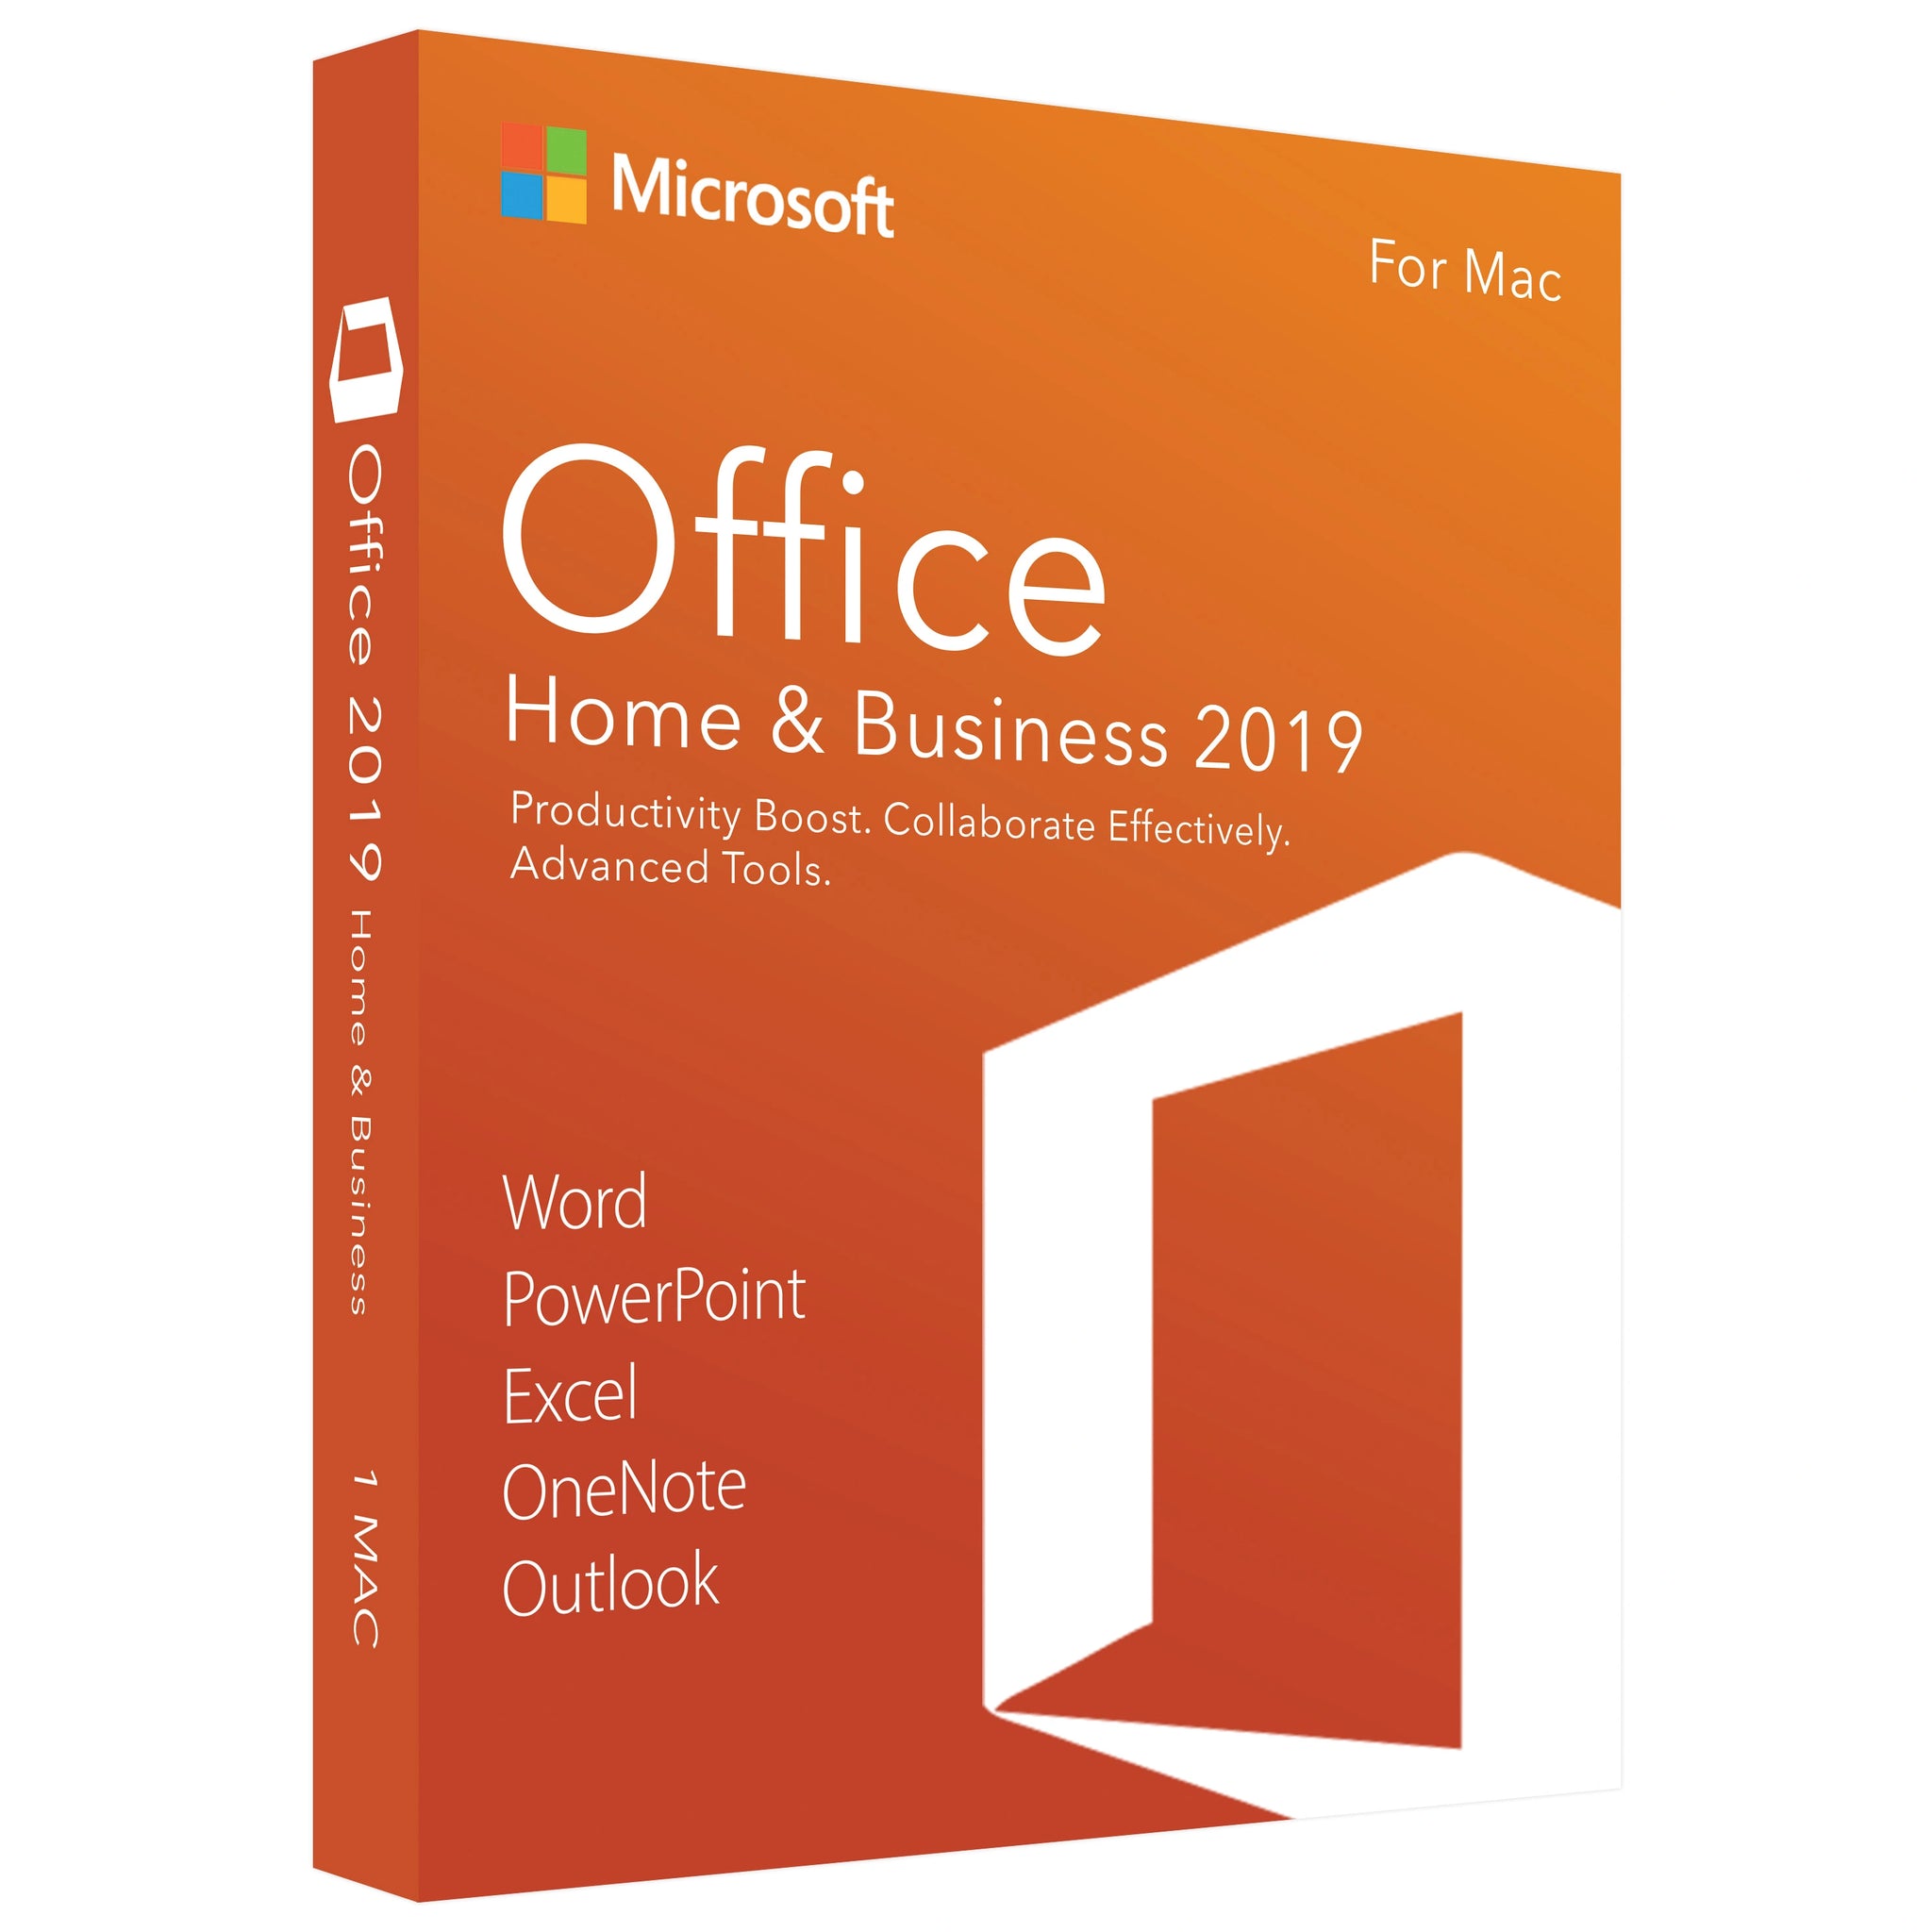 Microsoft Office 2019 Home & Business - Lifetime License Key for 1 MAC